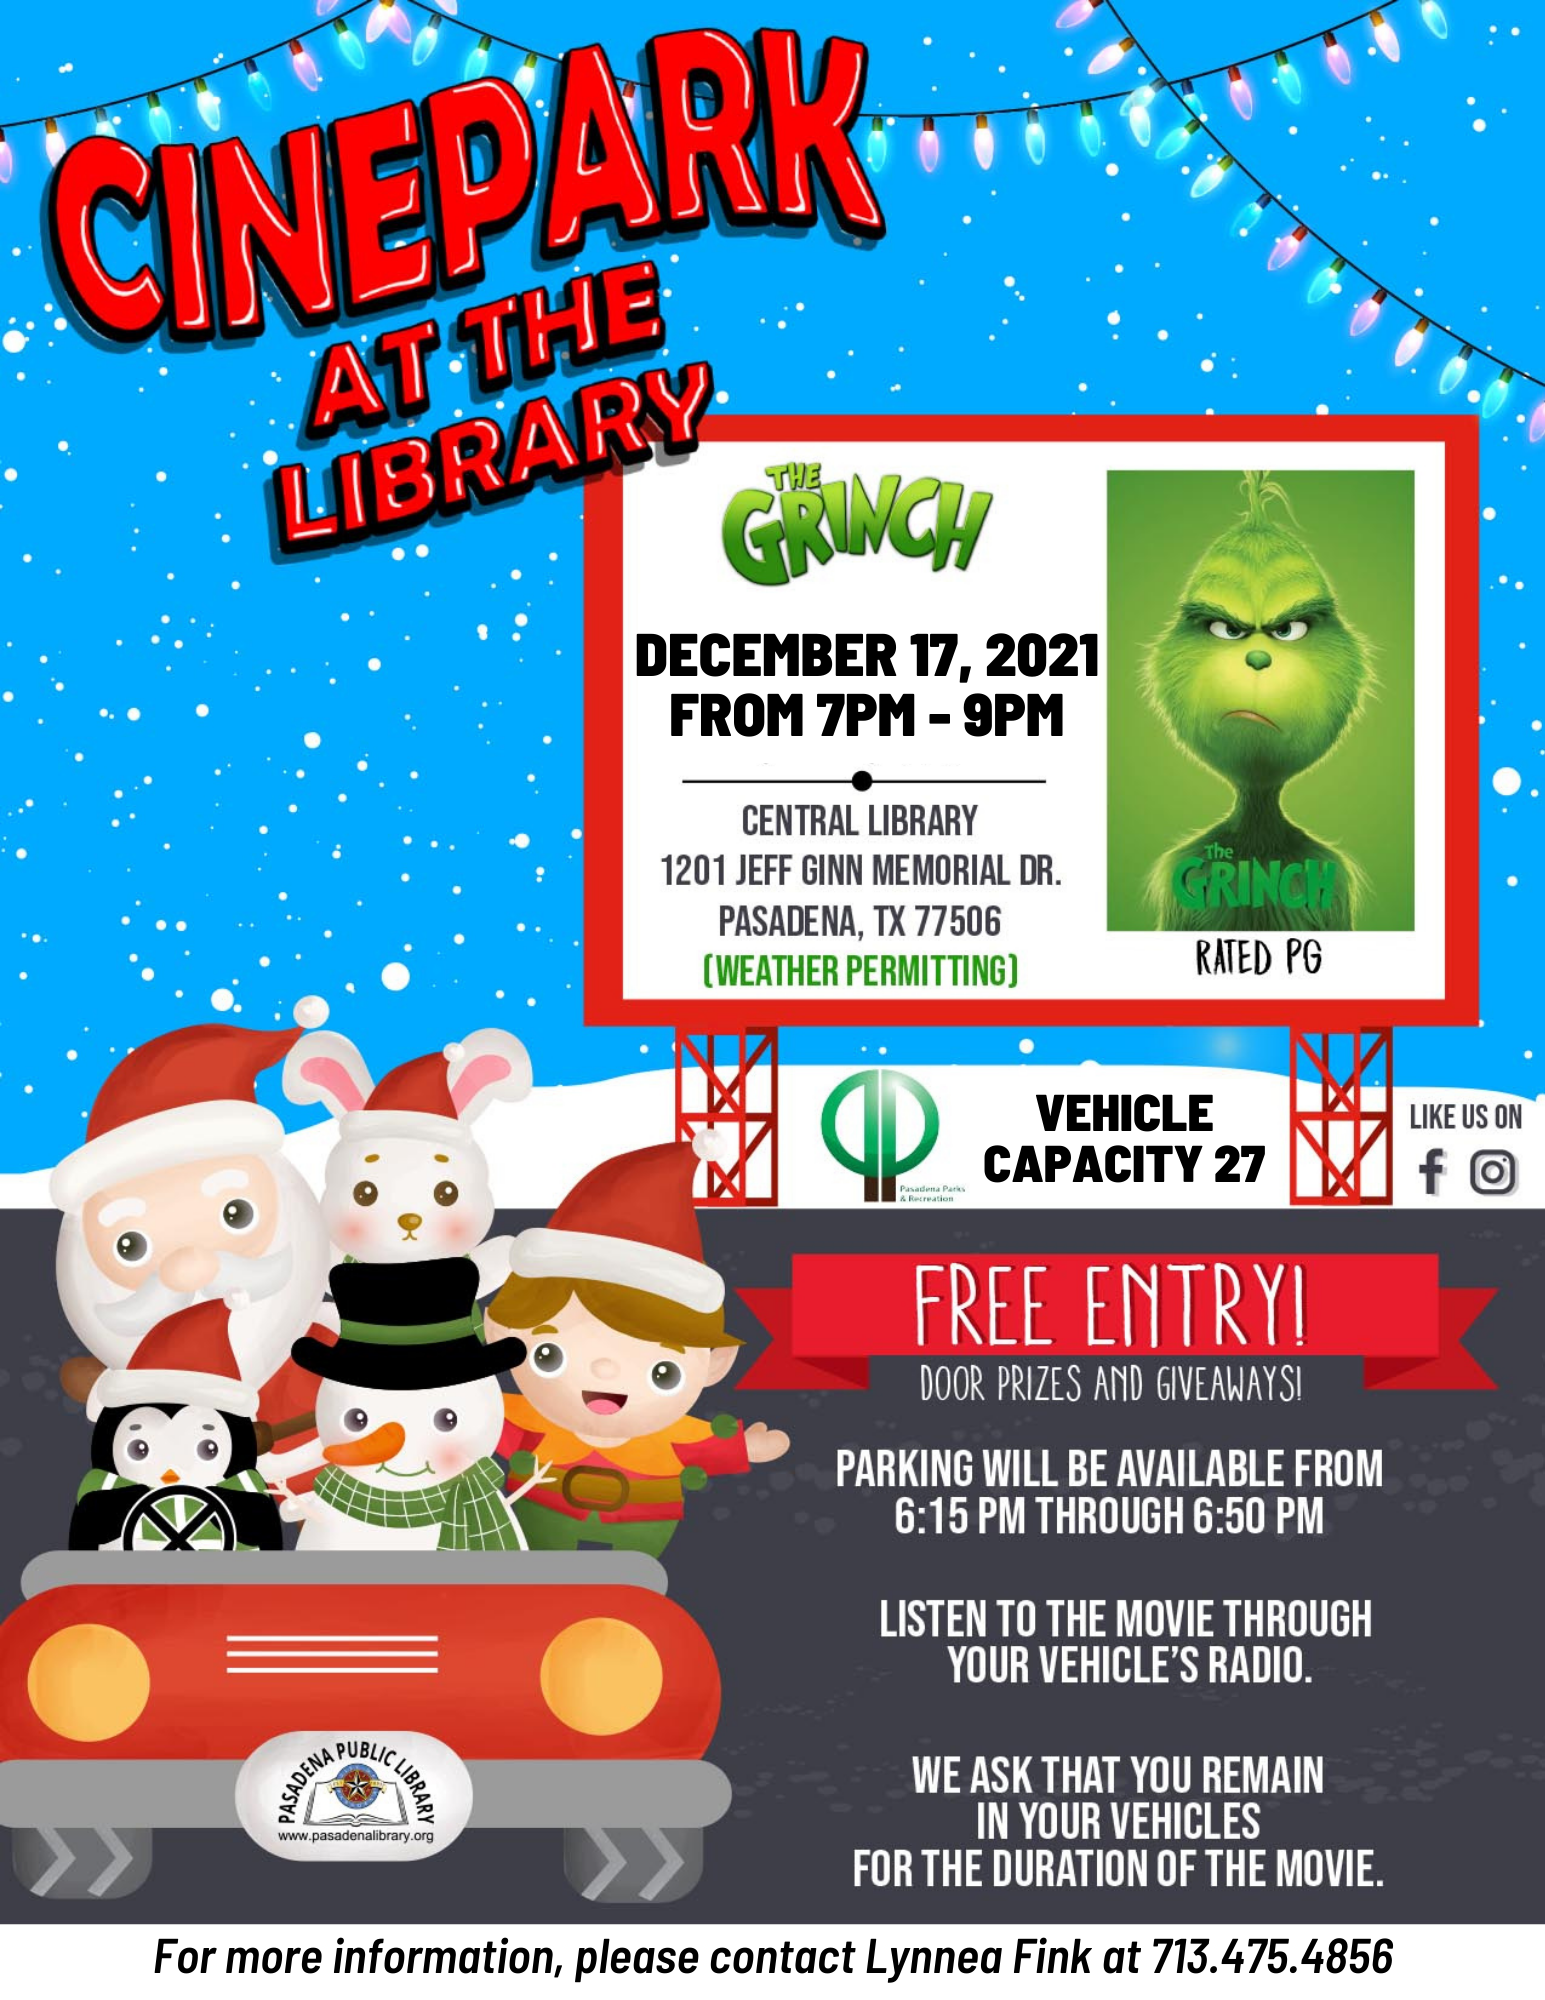 Last CINEPARK AT THE LIBRARY Movie of 2021! Join us on Friday, Decemeber 17 to watch 